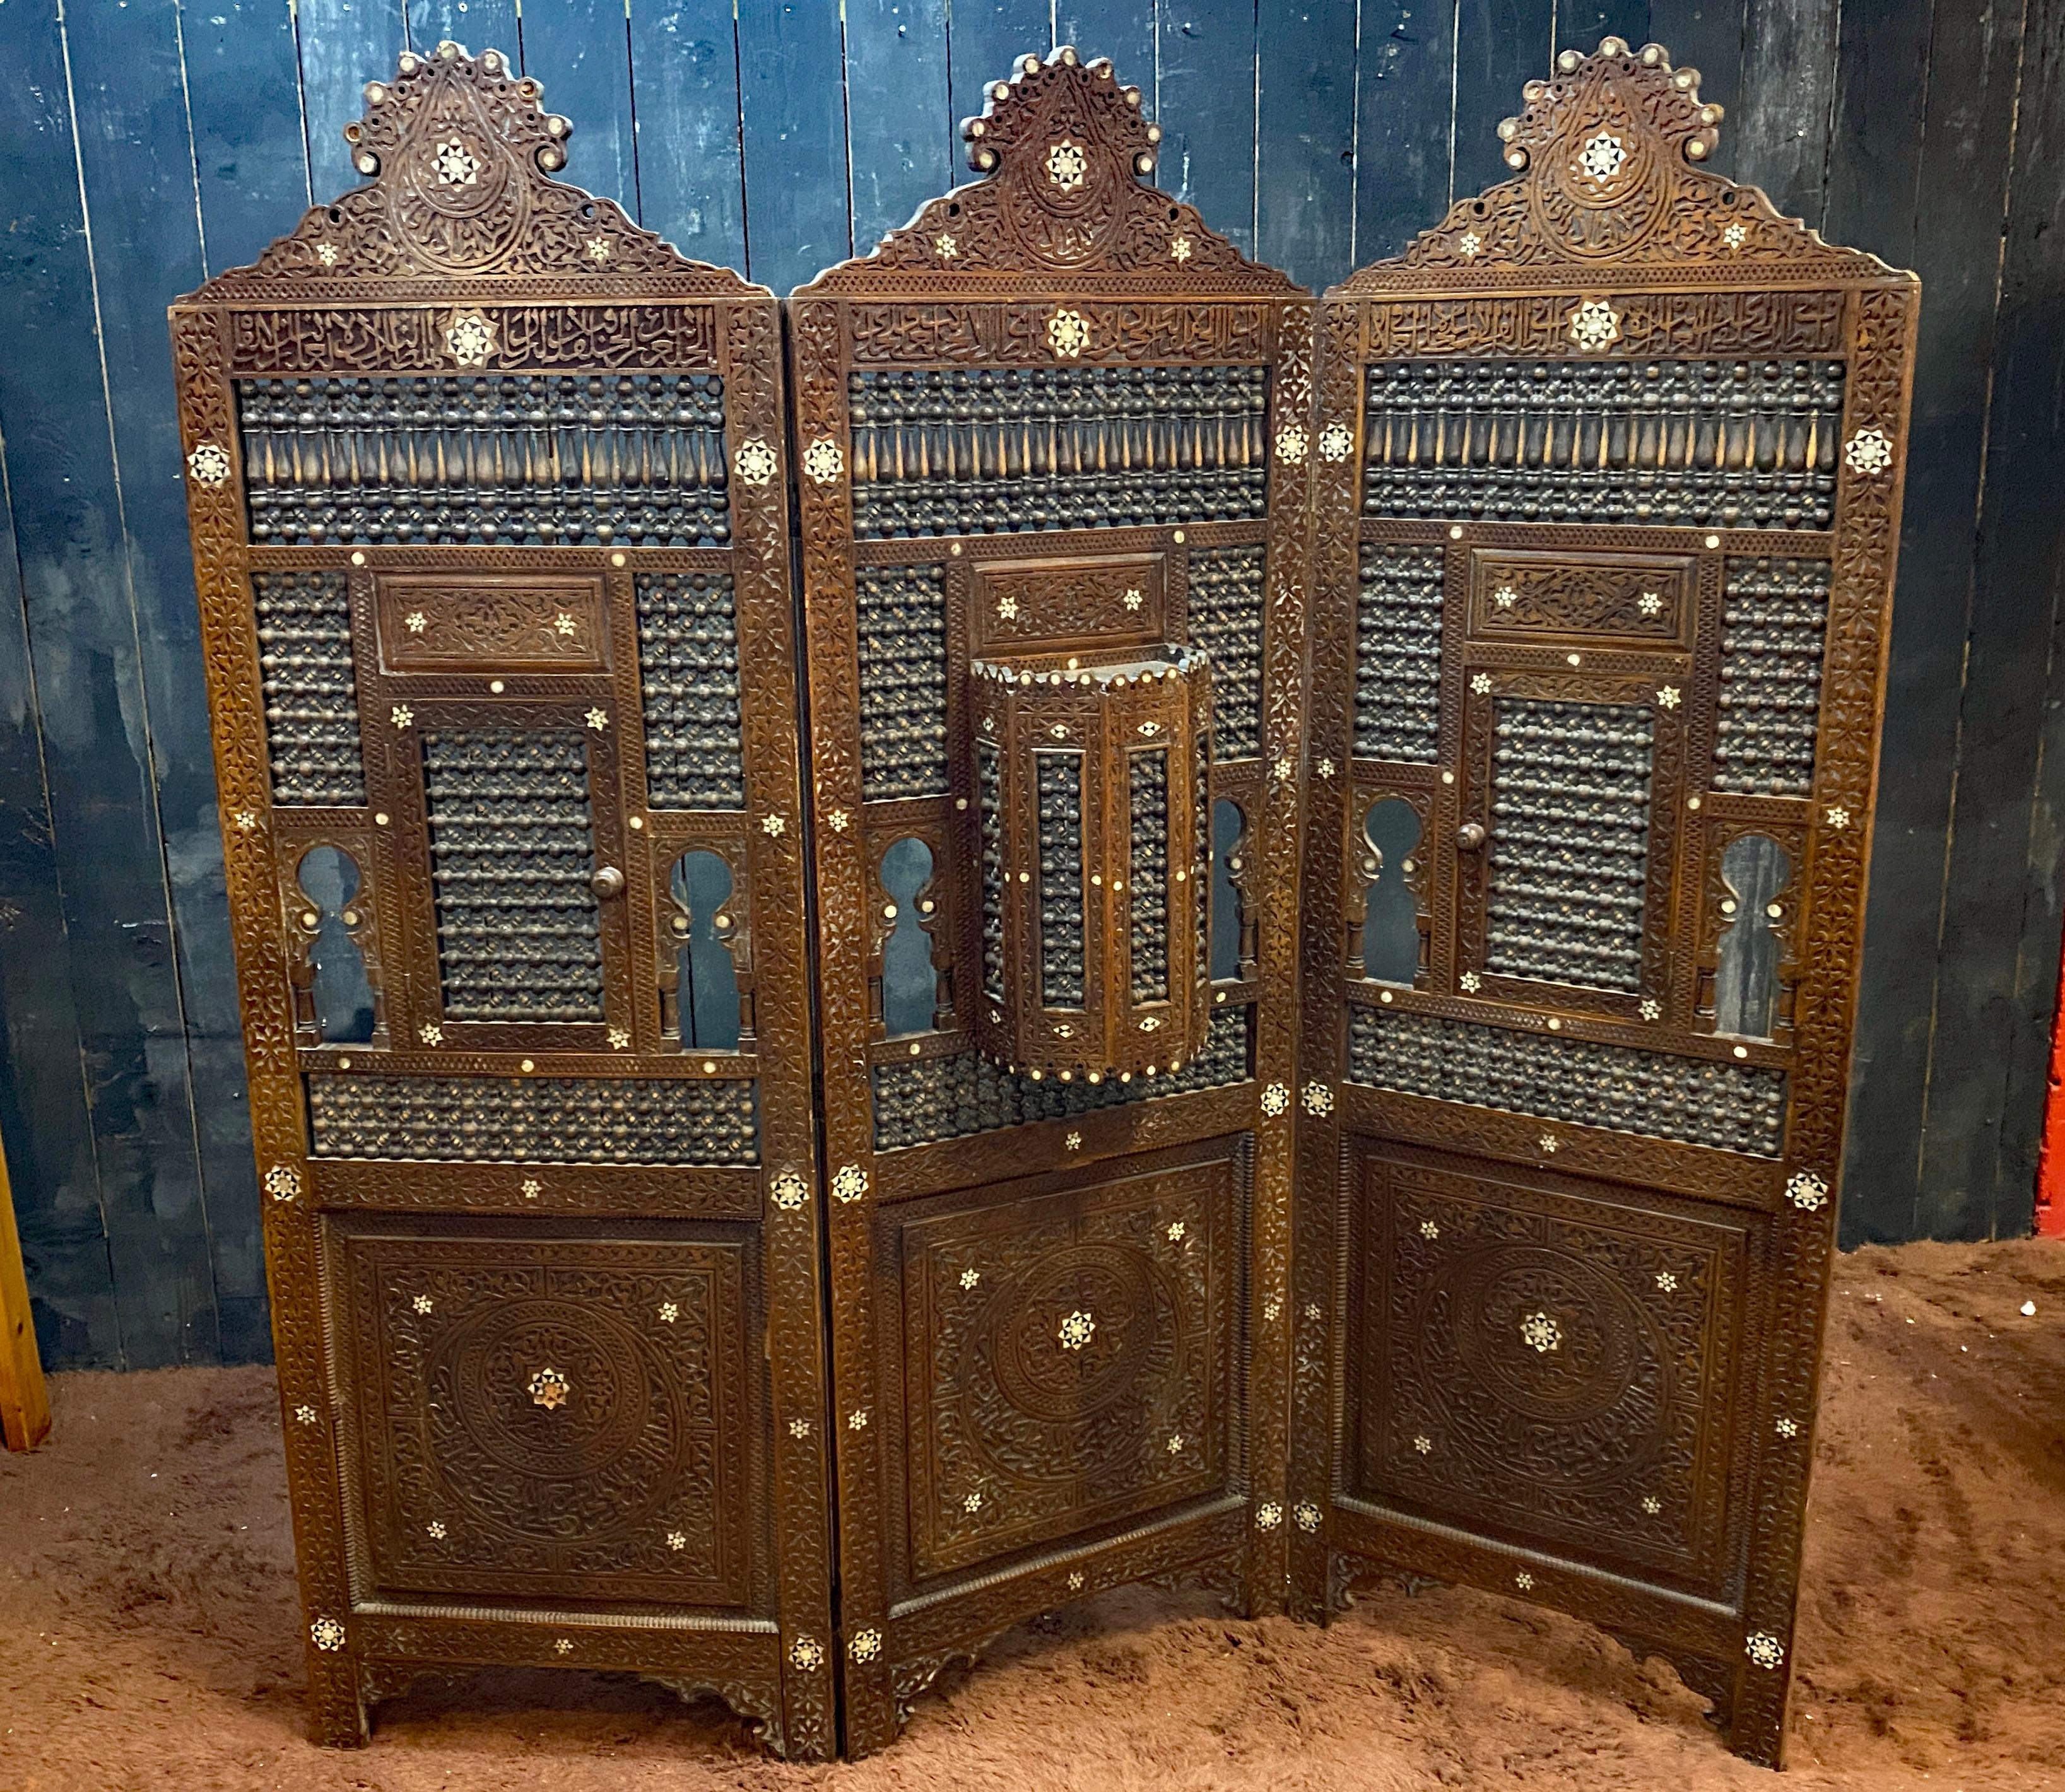 old oriental style moucharabieh screen, with several openings, work from the middle of the 19th century
carved wood with bone inlay